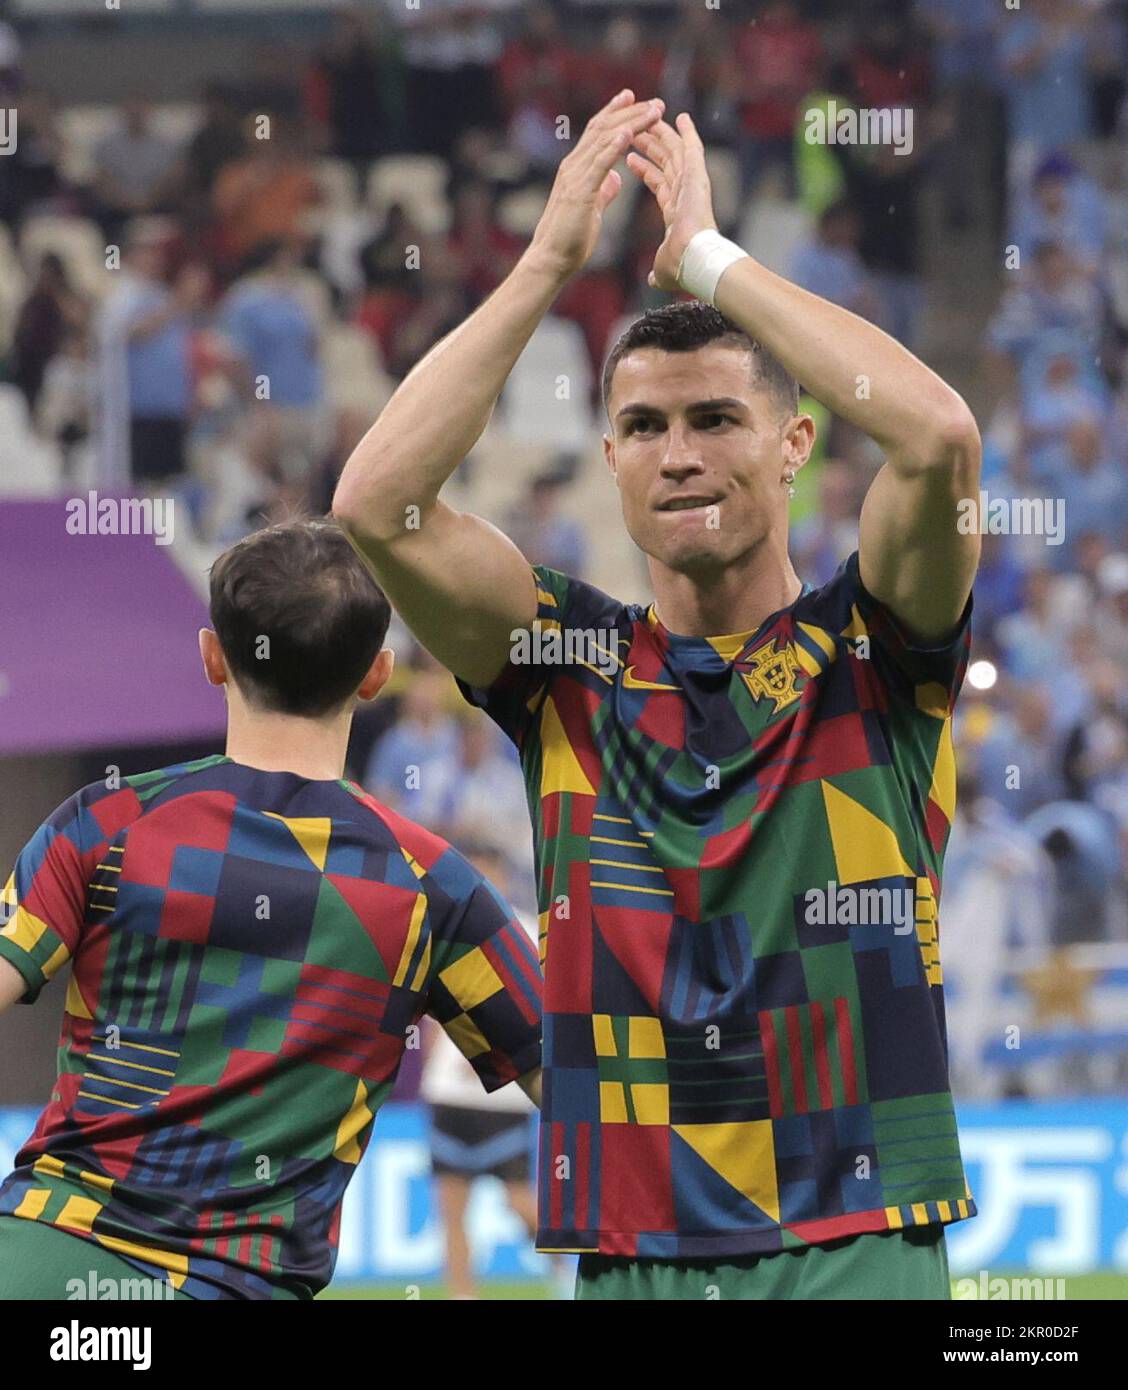 Doha, Qatar. 28th Nov 2022: Qatar, Doha, Football World cup  2022 : Portugal 2 - 0 Uruguay in group stage H. Ronaldo & Bruno Fernandes each one goal. Portuguese got qualified  for the second round as the team is sitting at the top of the table qualifying for the second round. Seshadri SUKUMAR Credit: Seshadri SUKUMAR/Alamy Live News Stock Photo